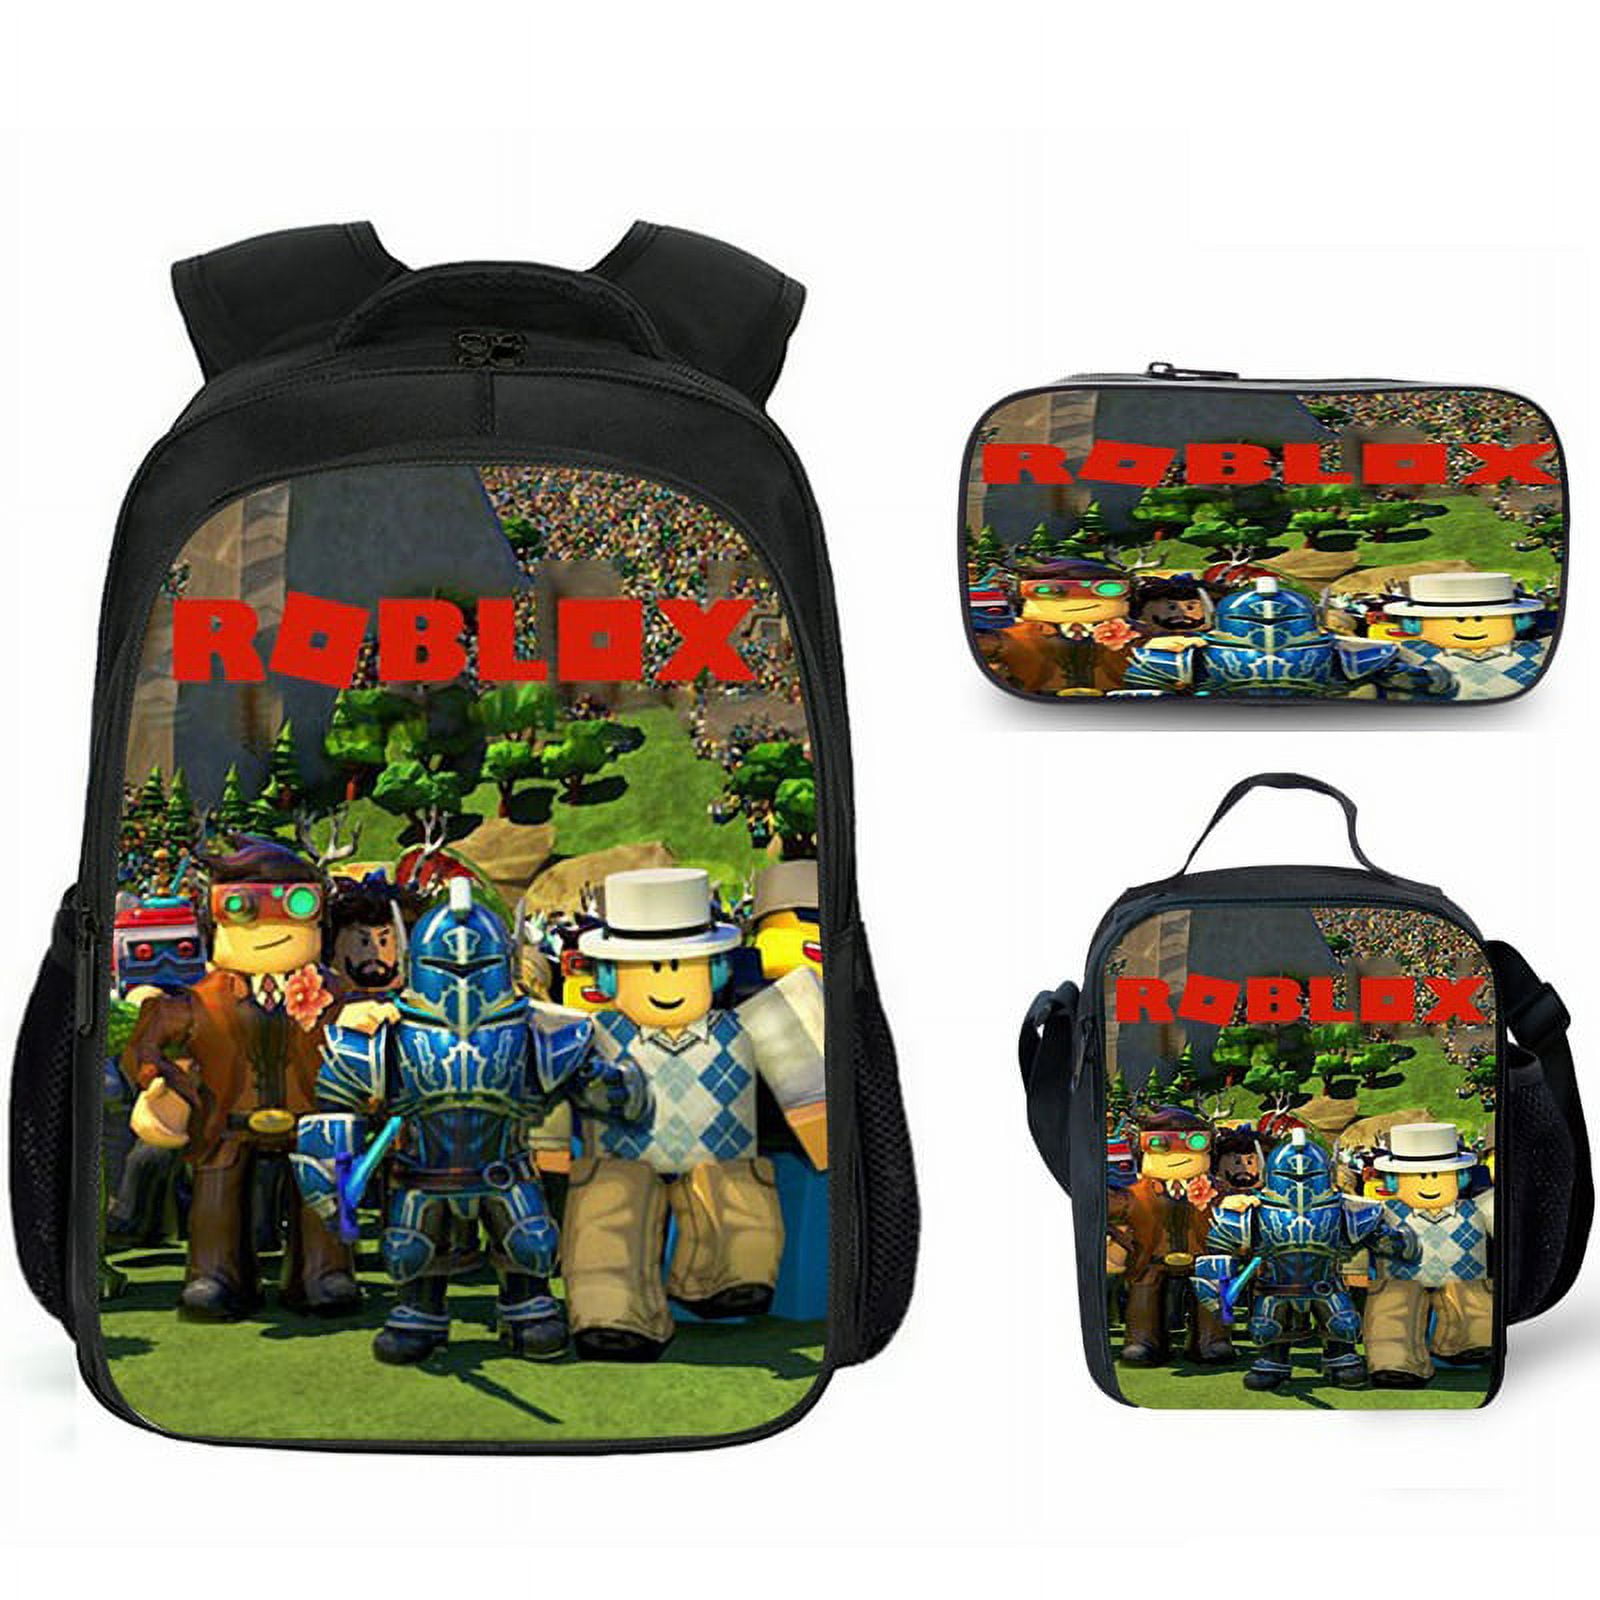 Stylish Usb Student Laptop Backpack For Youth, Roblox Game